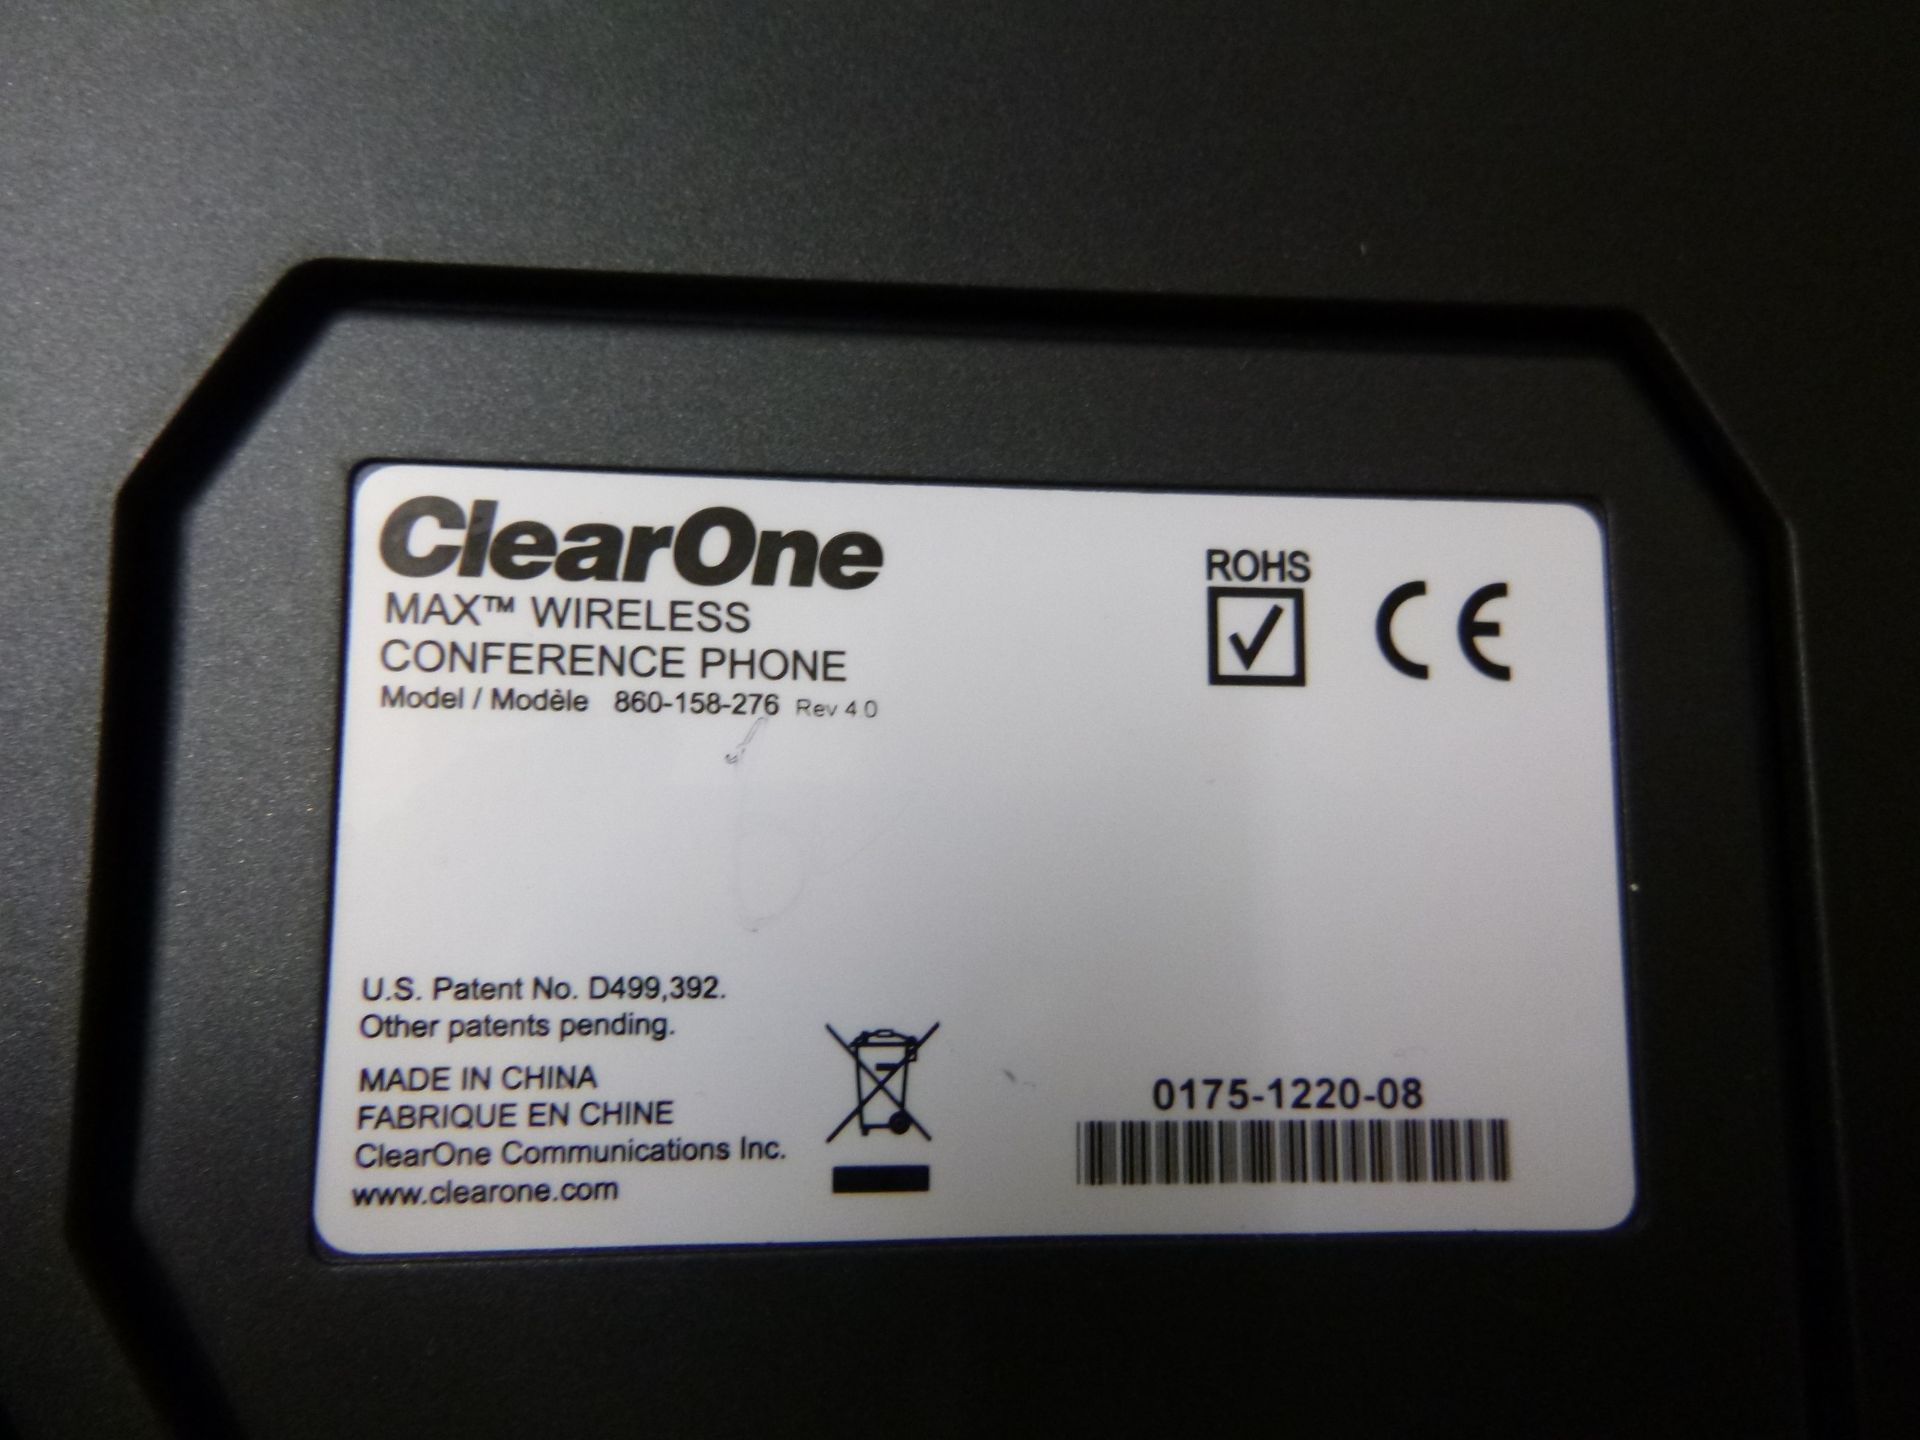 CLEAR ONE MAX WIRELESS CONFERENCE PHONE. MODEL 860-158-276 REV 4.0 - Image 2 of 2